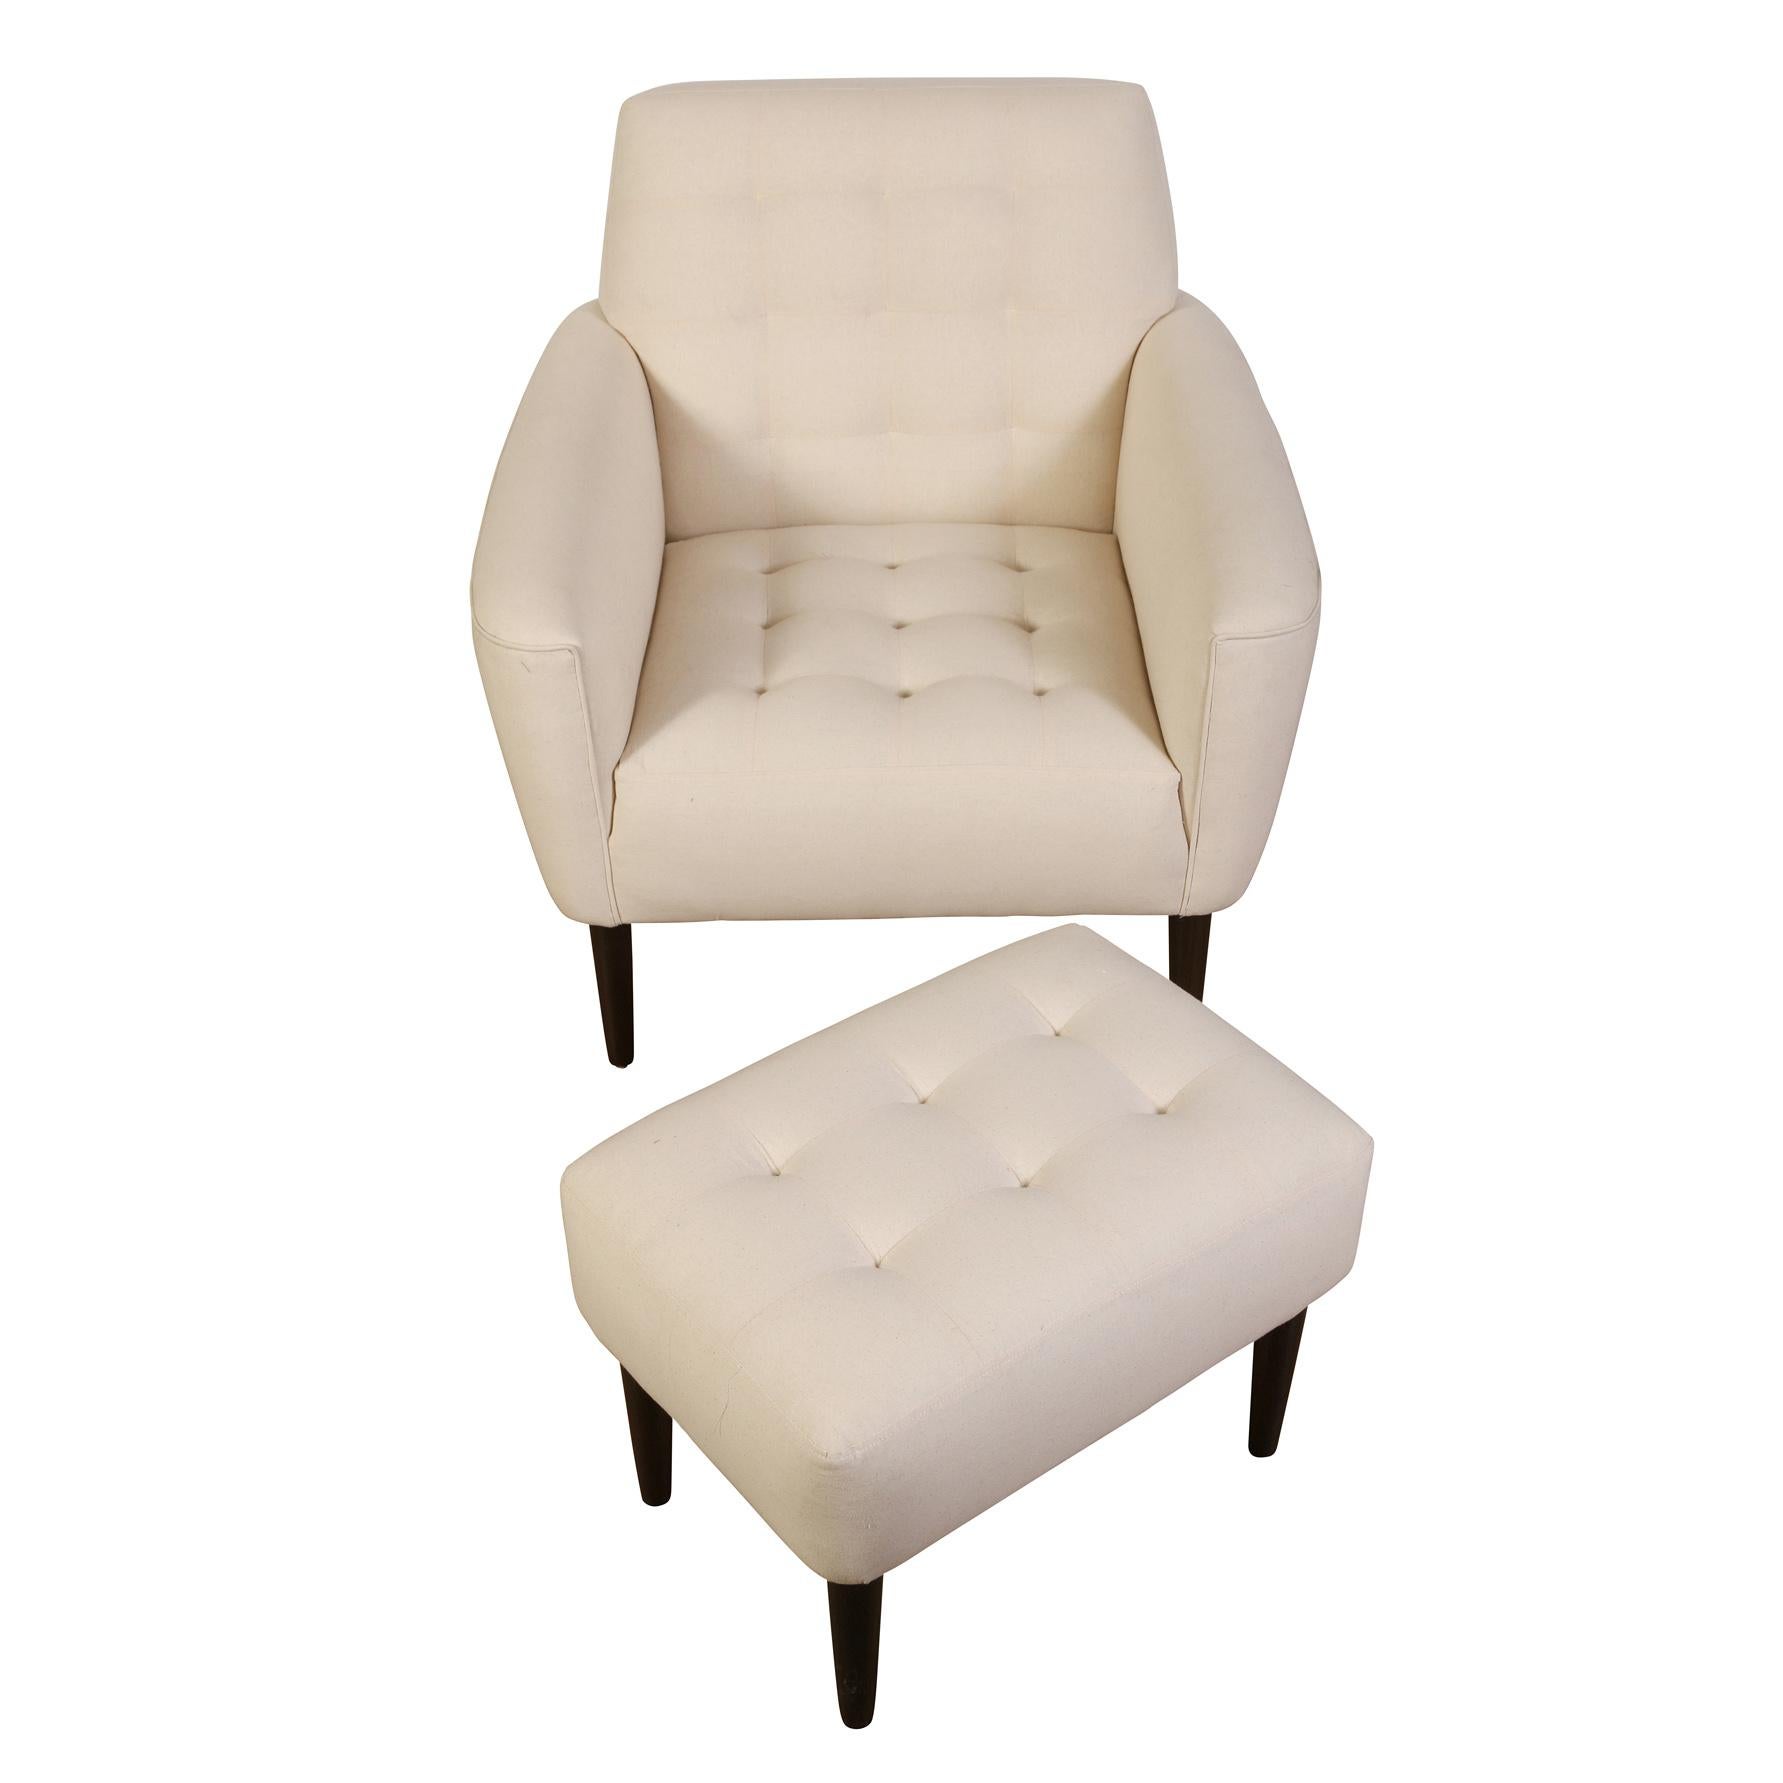 A chic mid-century arm chair with a tight, button tufted back and seat, accompanied by a button tufted ottoman.  Very comfortable, this duo has been reupholstered in a crisp white linen, accentuating the clean lines of the pieces.